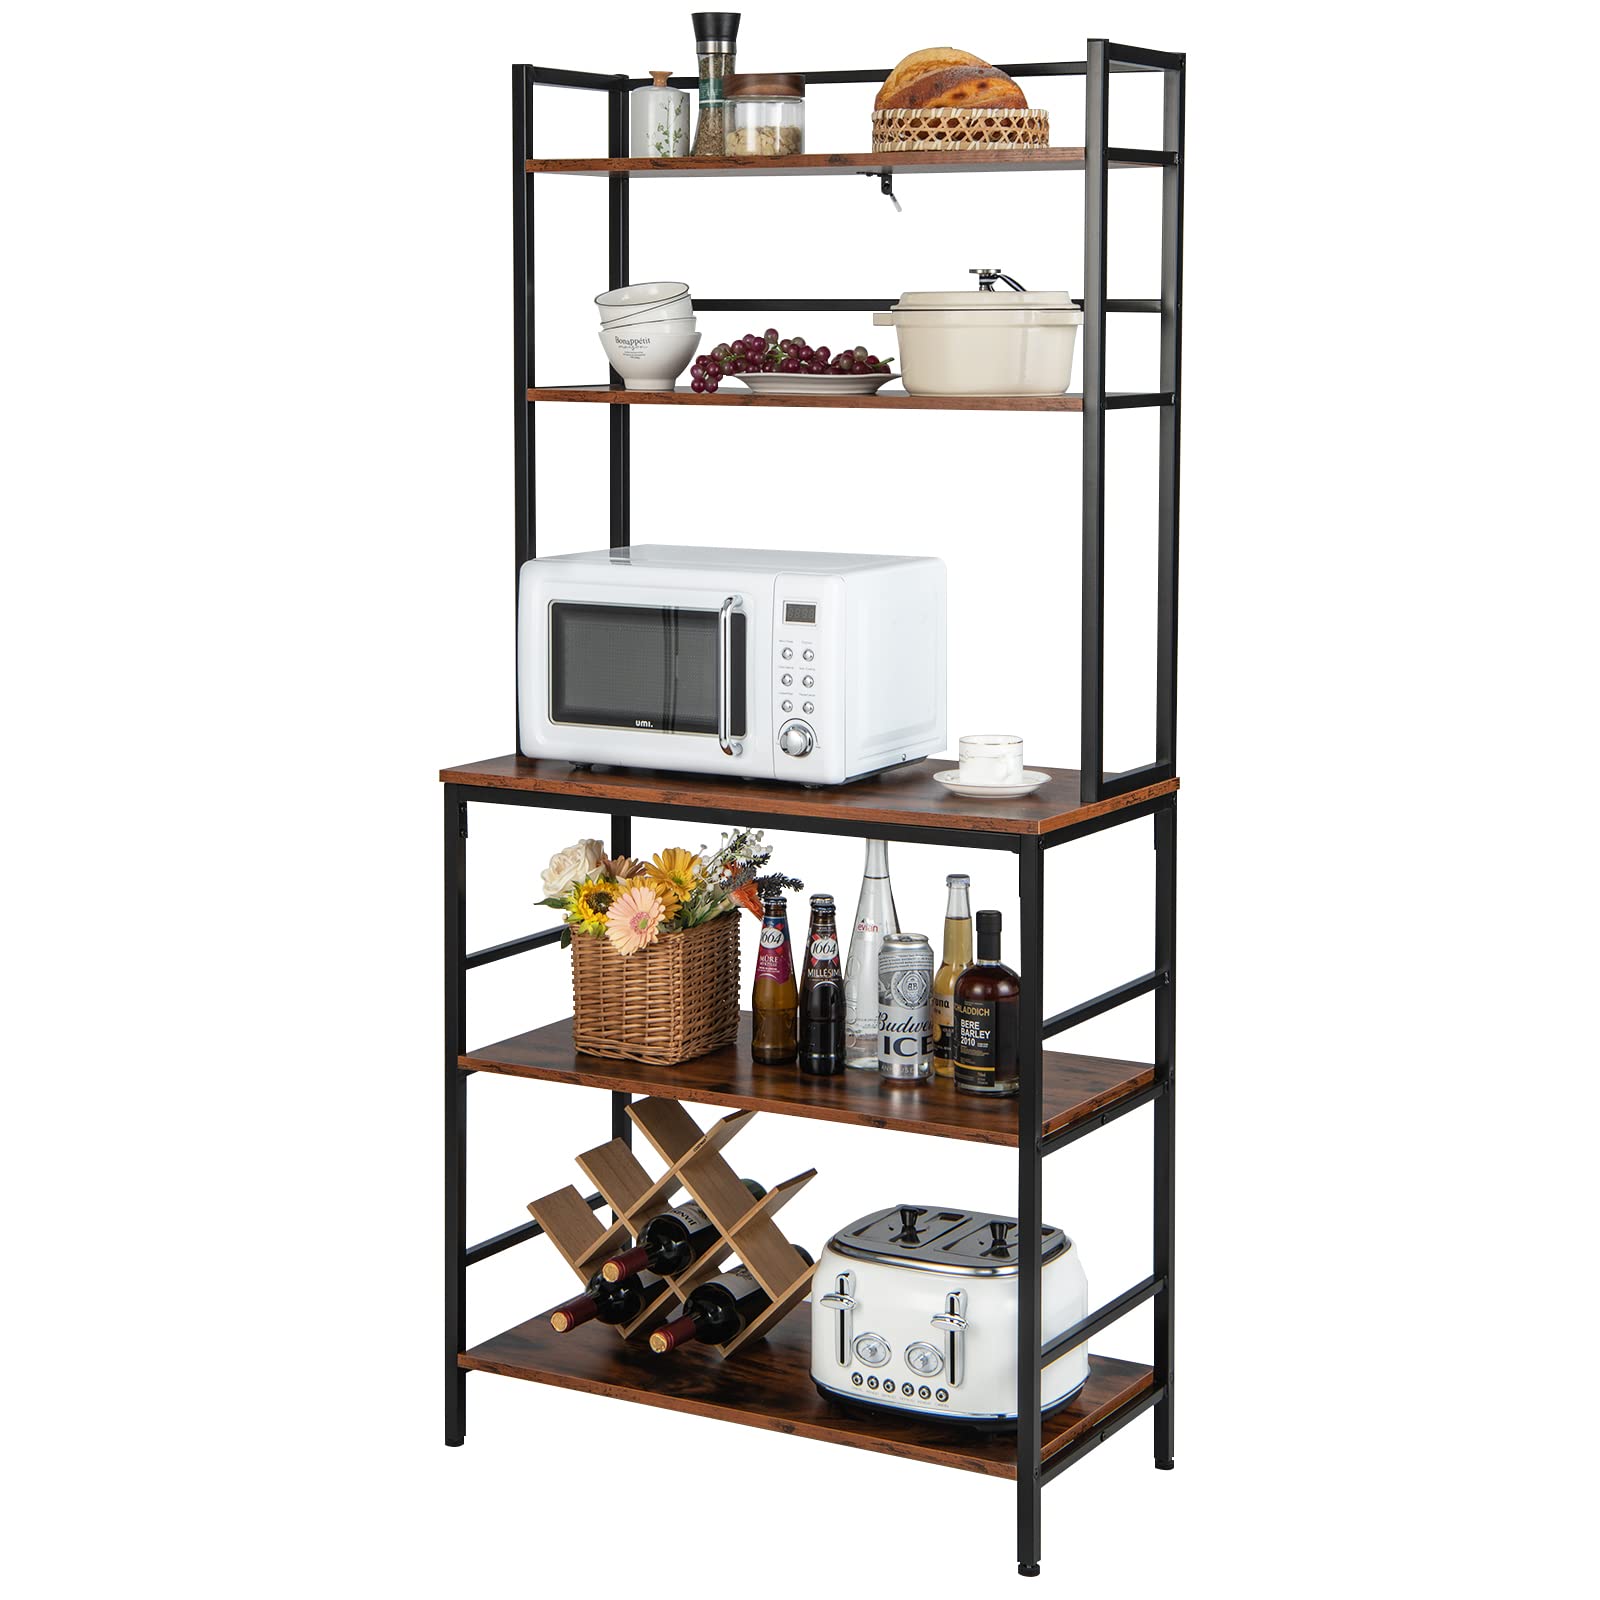 Giantex 5 Tier Bakers Rack with Hutch, Microwave Oven Stand with Spice Racks, Adjustable Feet (Rustic Brown & Black)